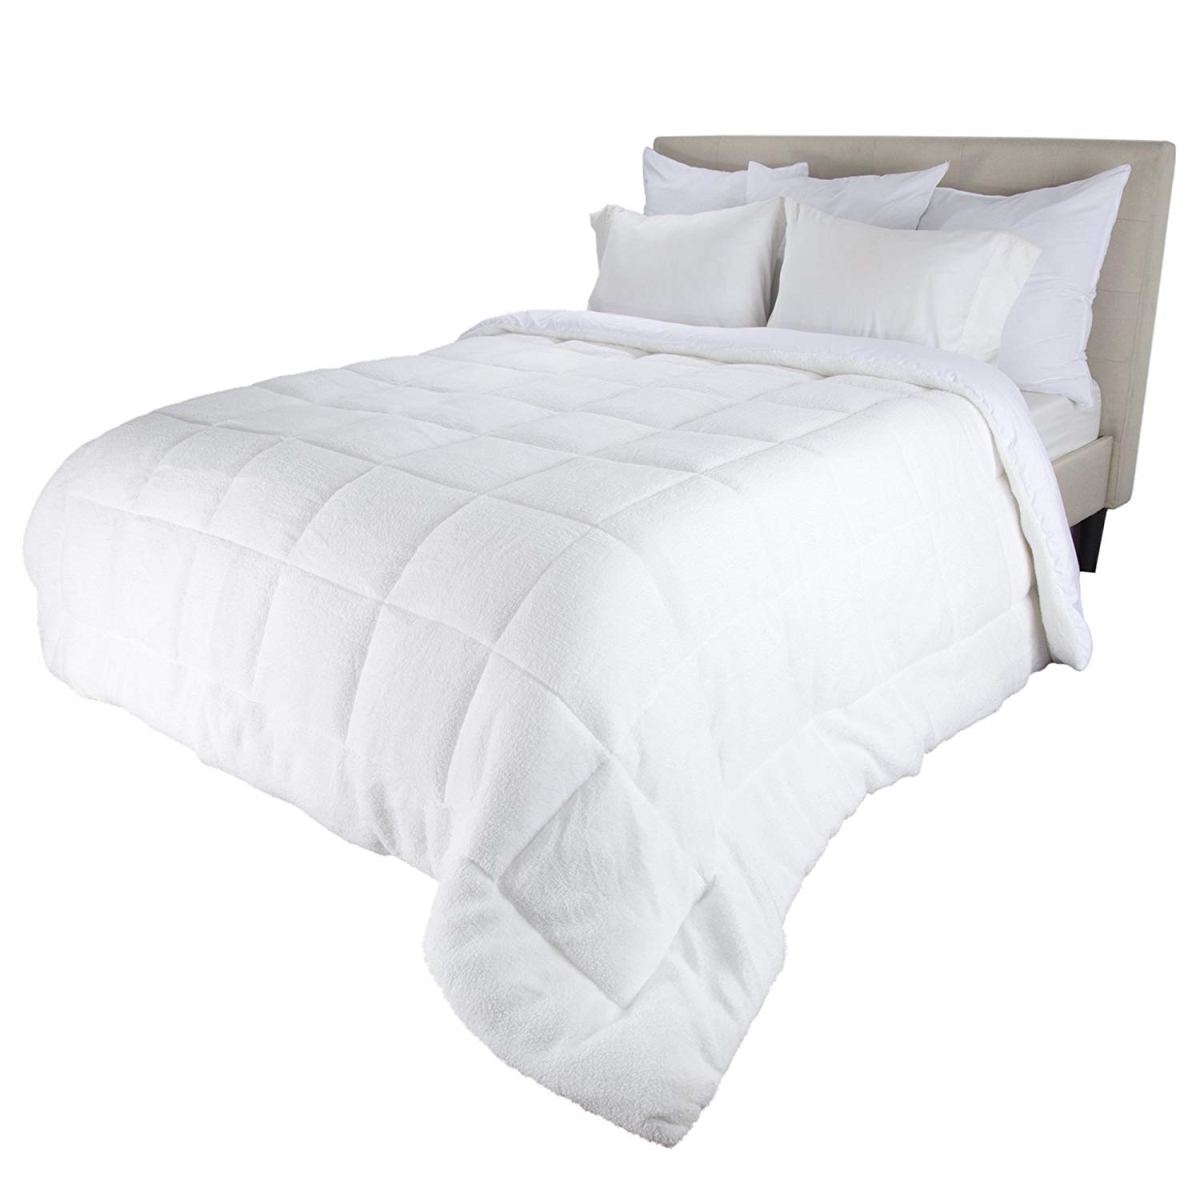 64a-03977 Reversible Oversized Down Alt Comforter With Sherpa, King Size